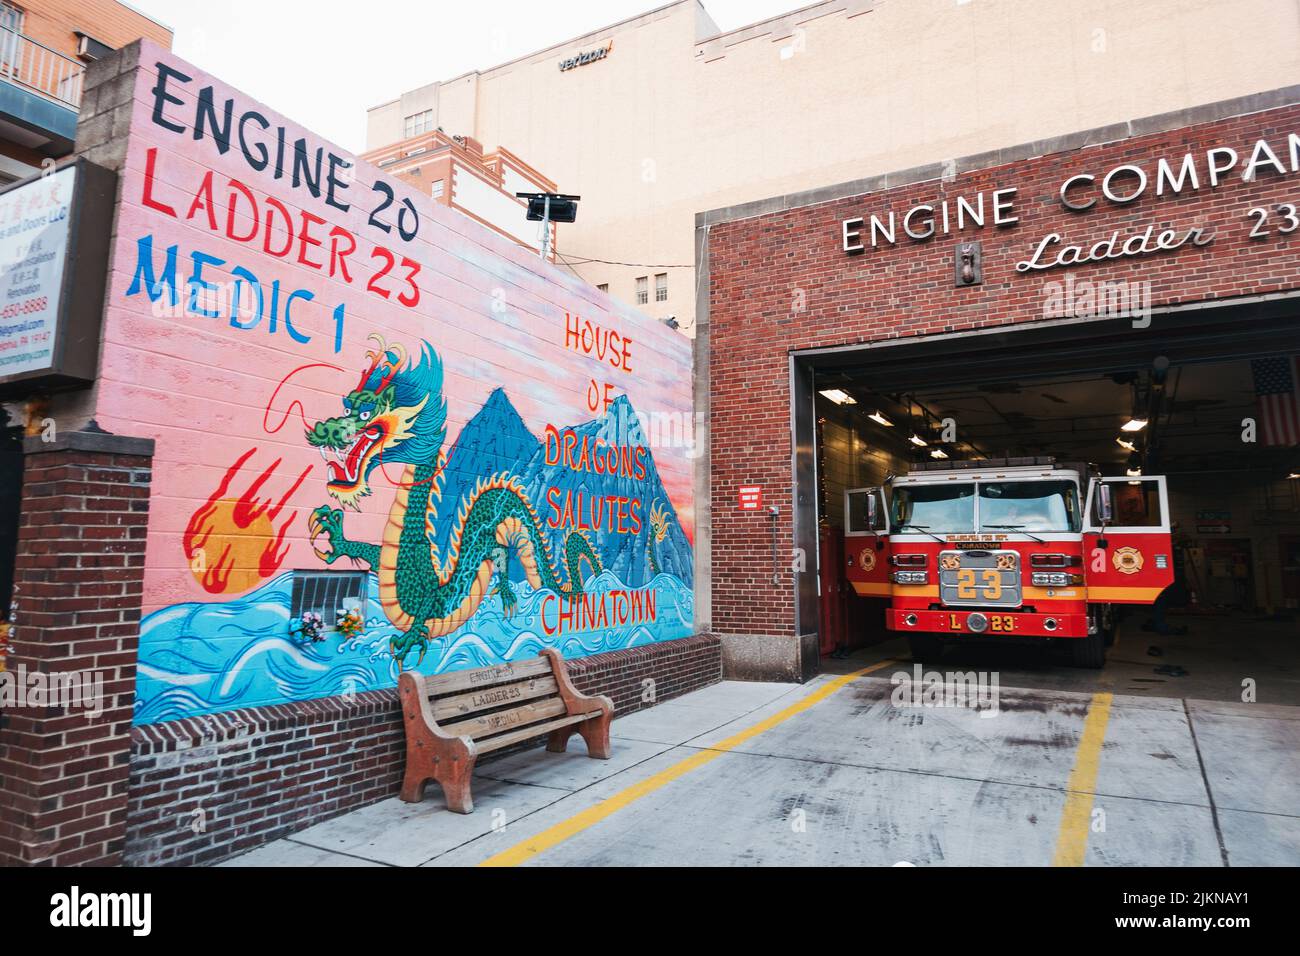 Ladder 23 fire truck inside the Philadelphia Fire Department Chinatown station, replete with a street art dragon Stock Photo